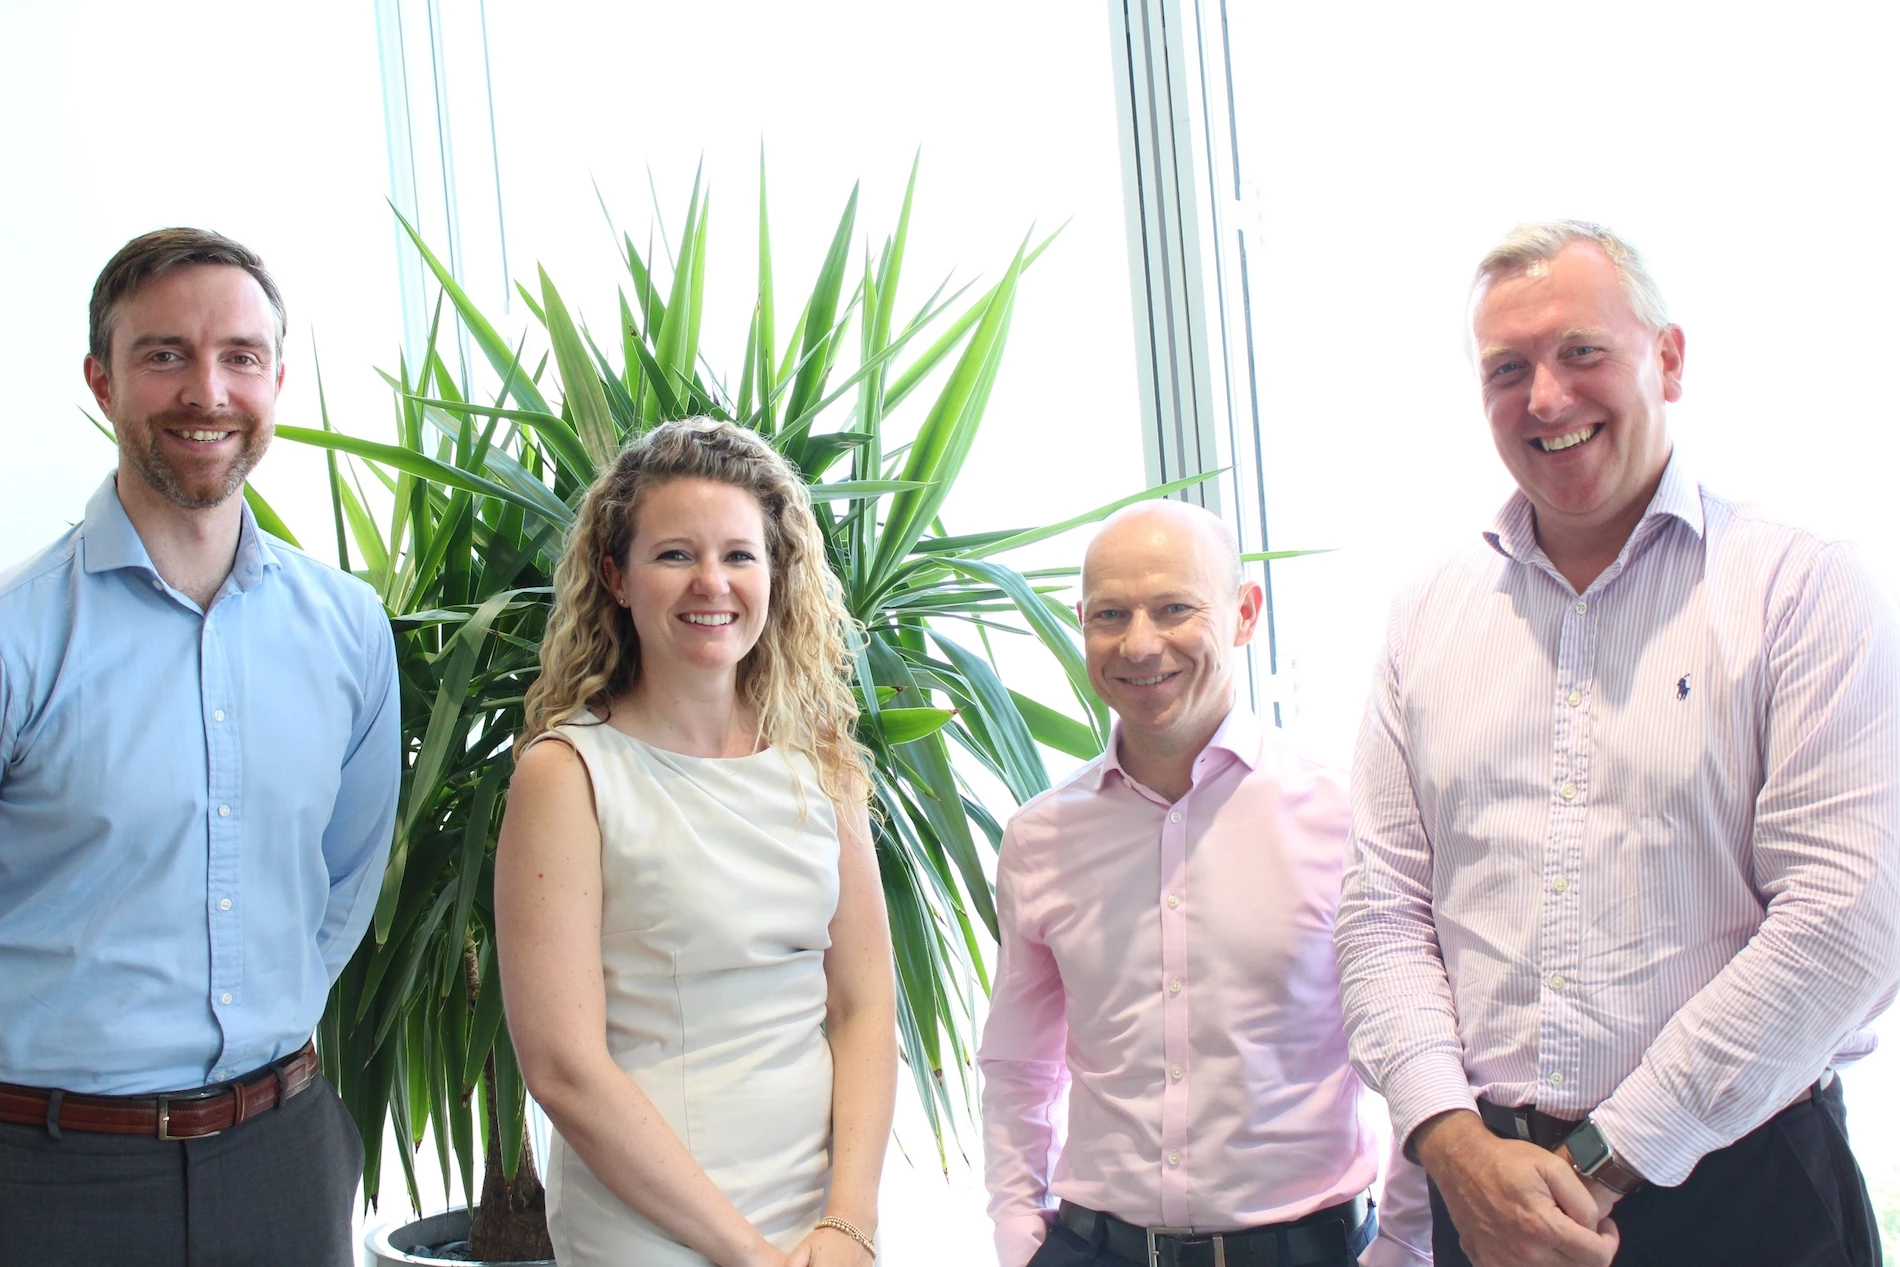 James Livingston and Amy Crofton of Foresight with David Harrop and Nick Smith of Reward.